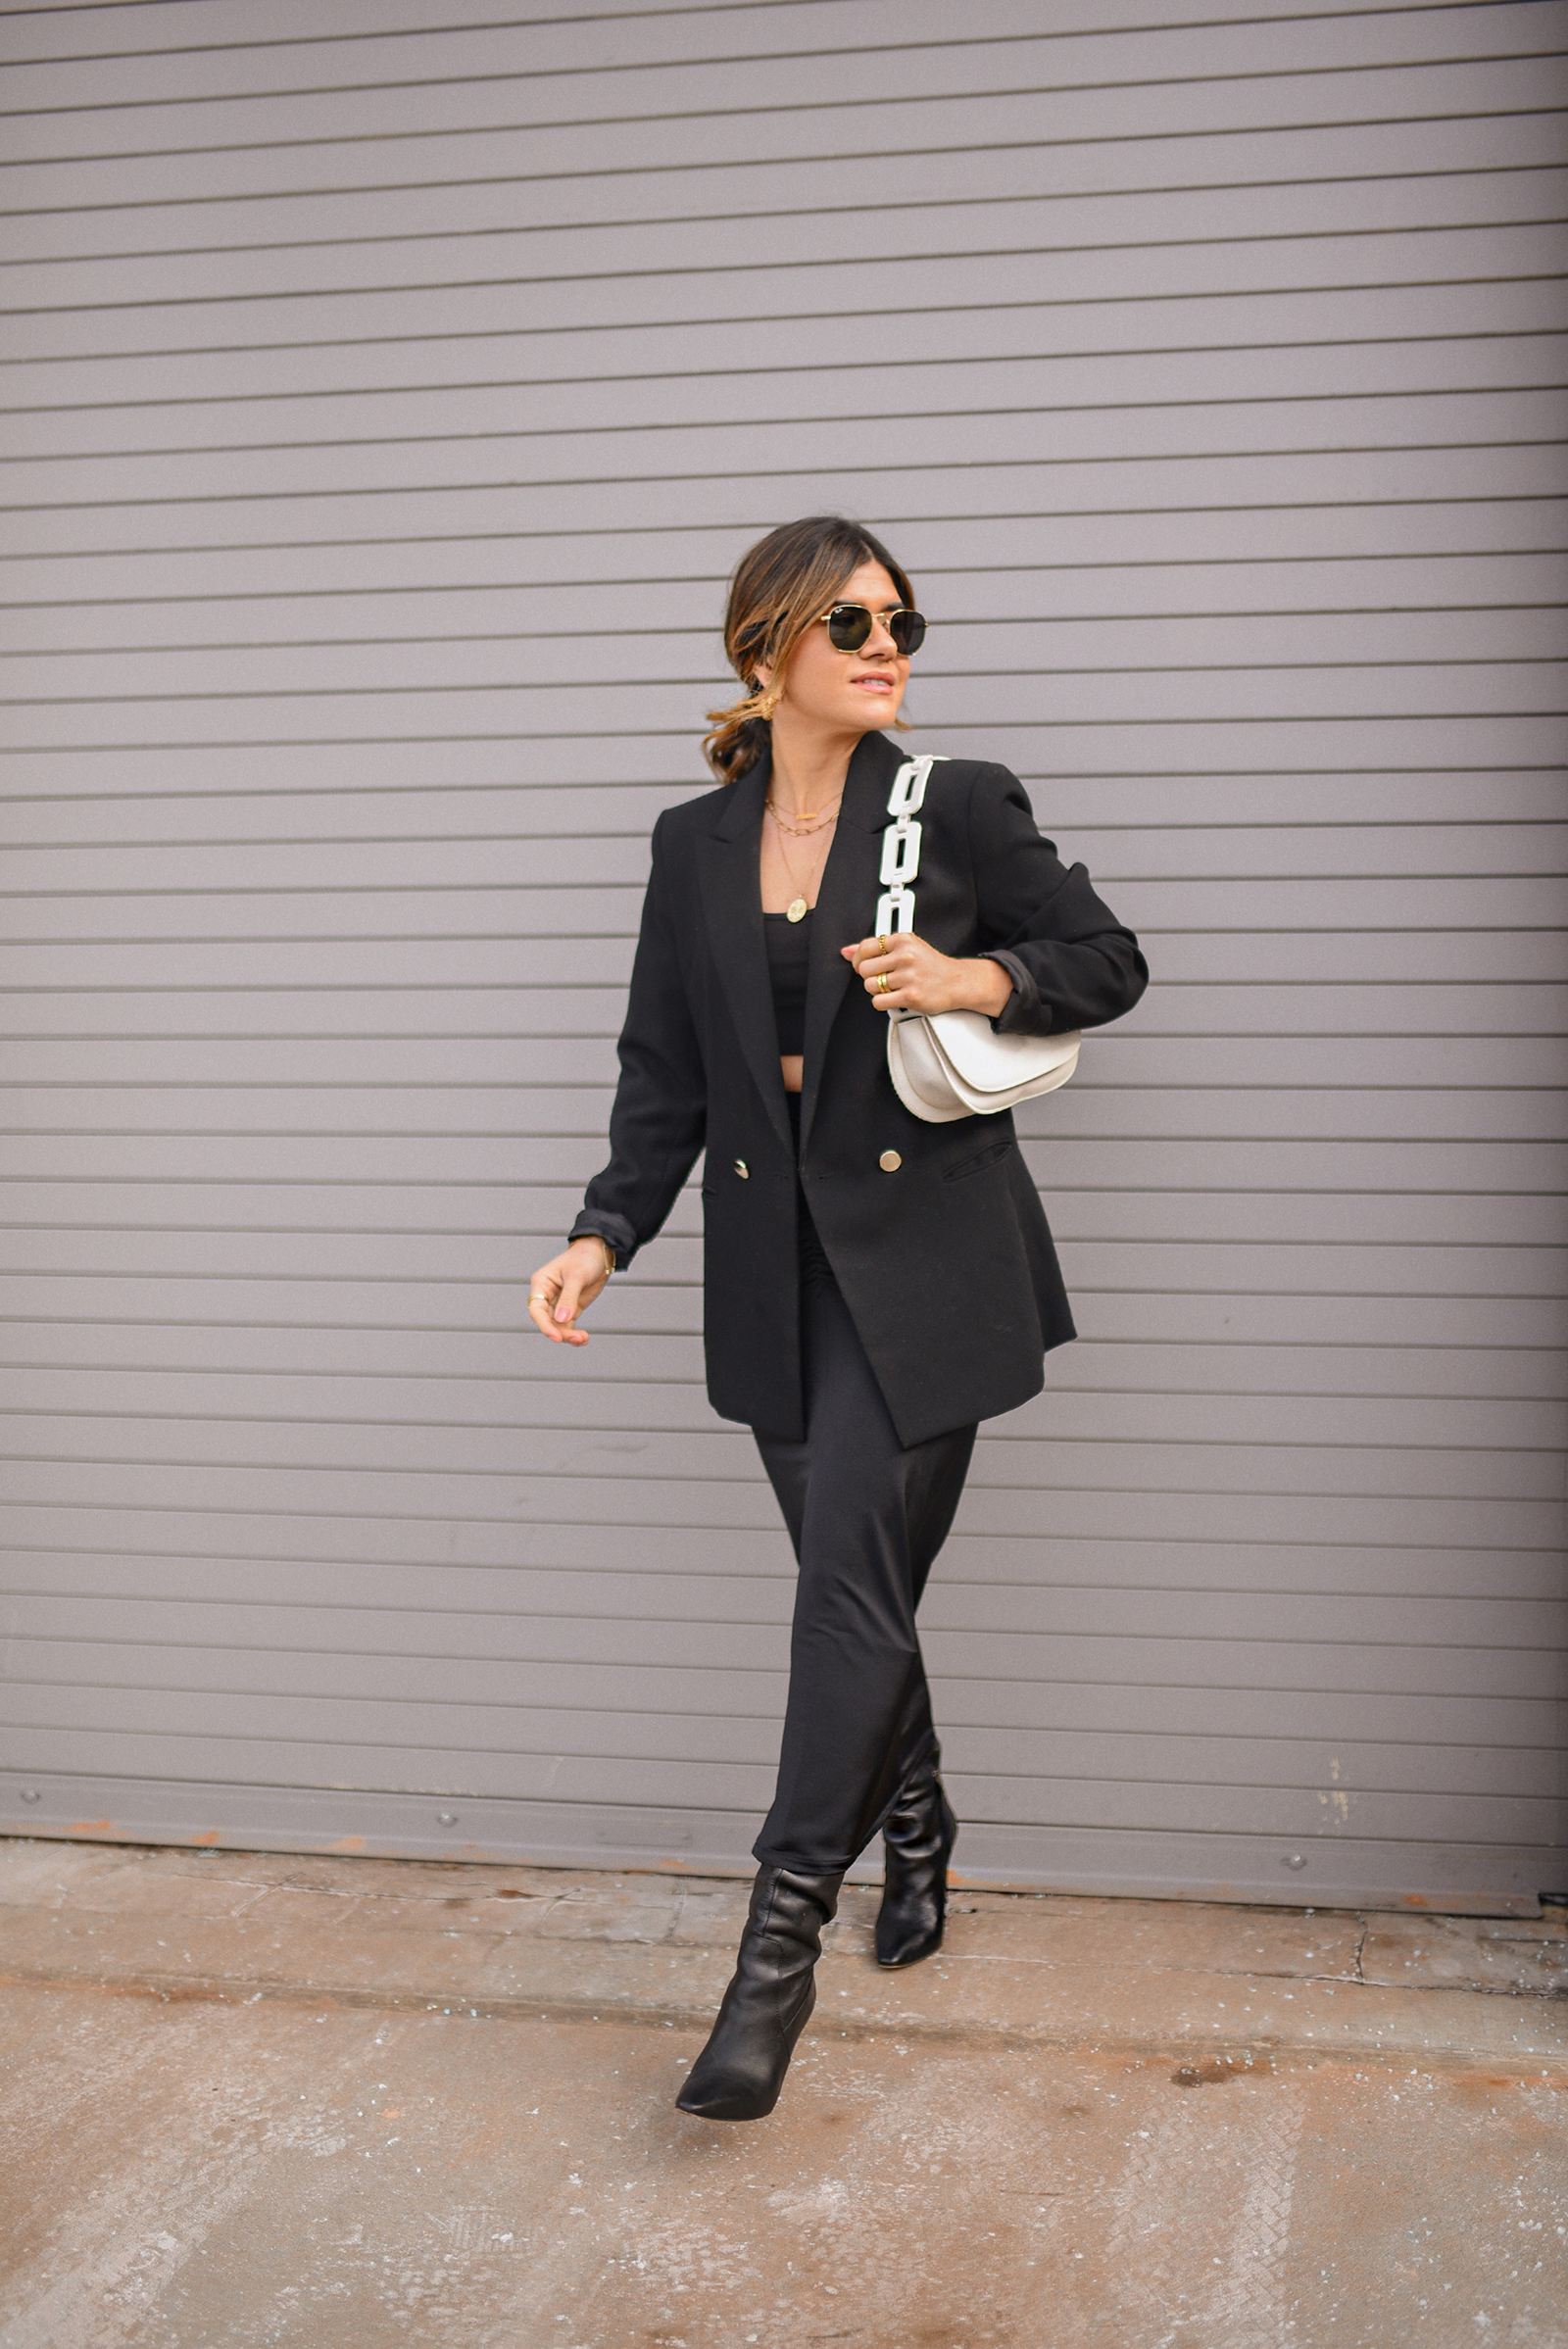 Carolina Hellal of Chic Talk wearing a total black look with midi skirt, crop top and blazer